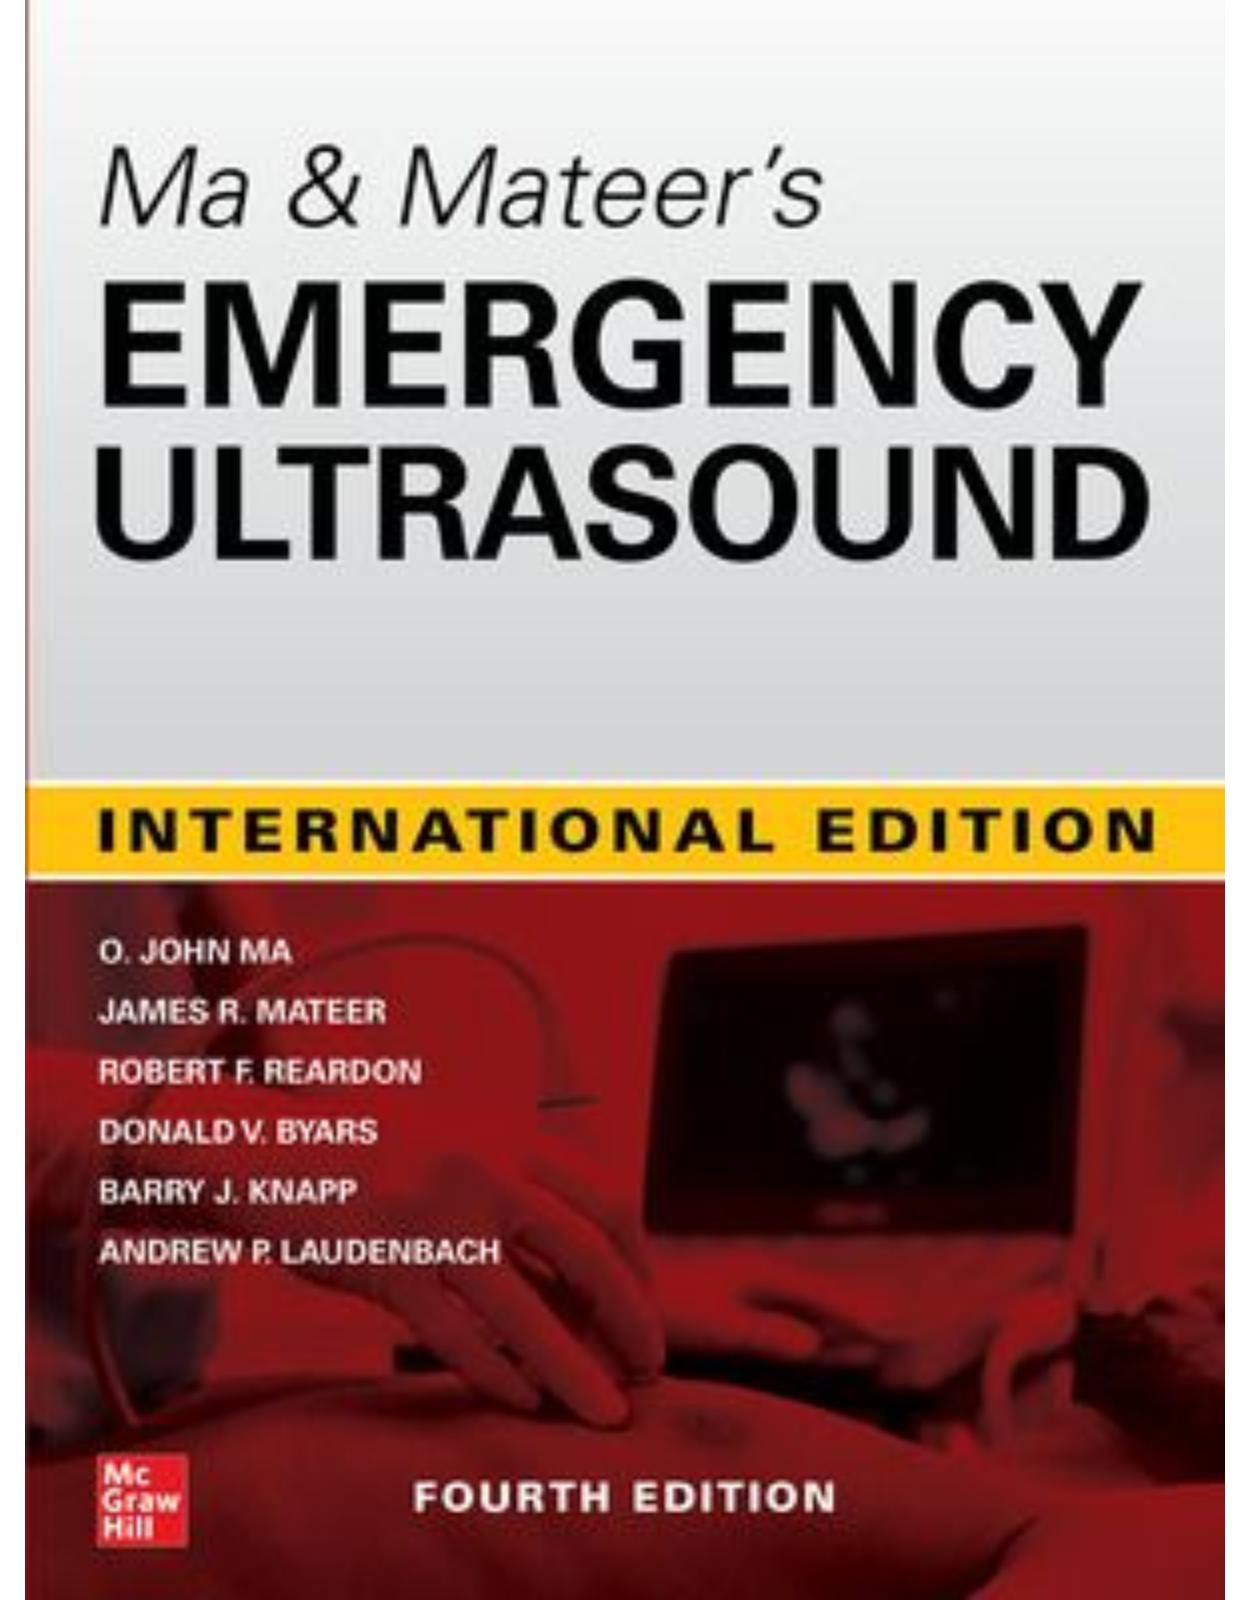 Ma & Mateers Emergency Ultrasound, 4th edition